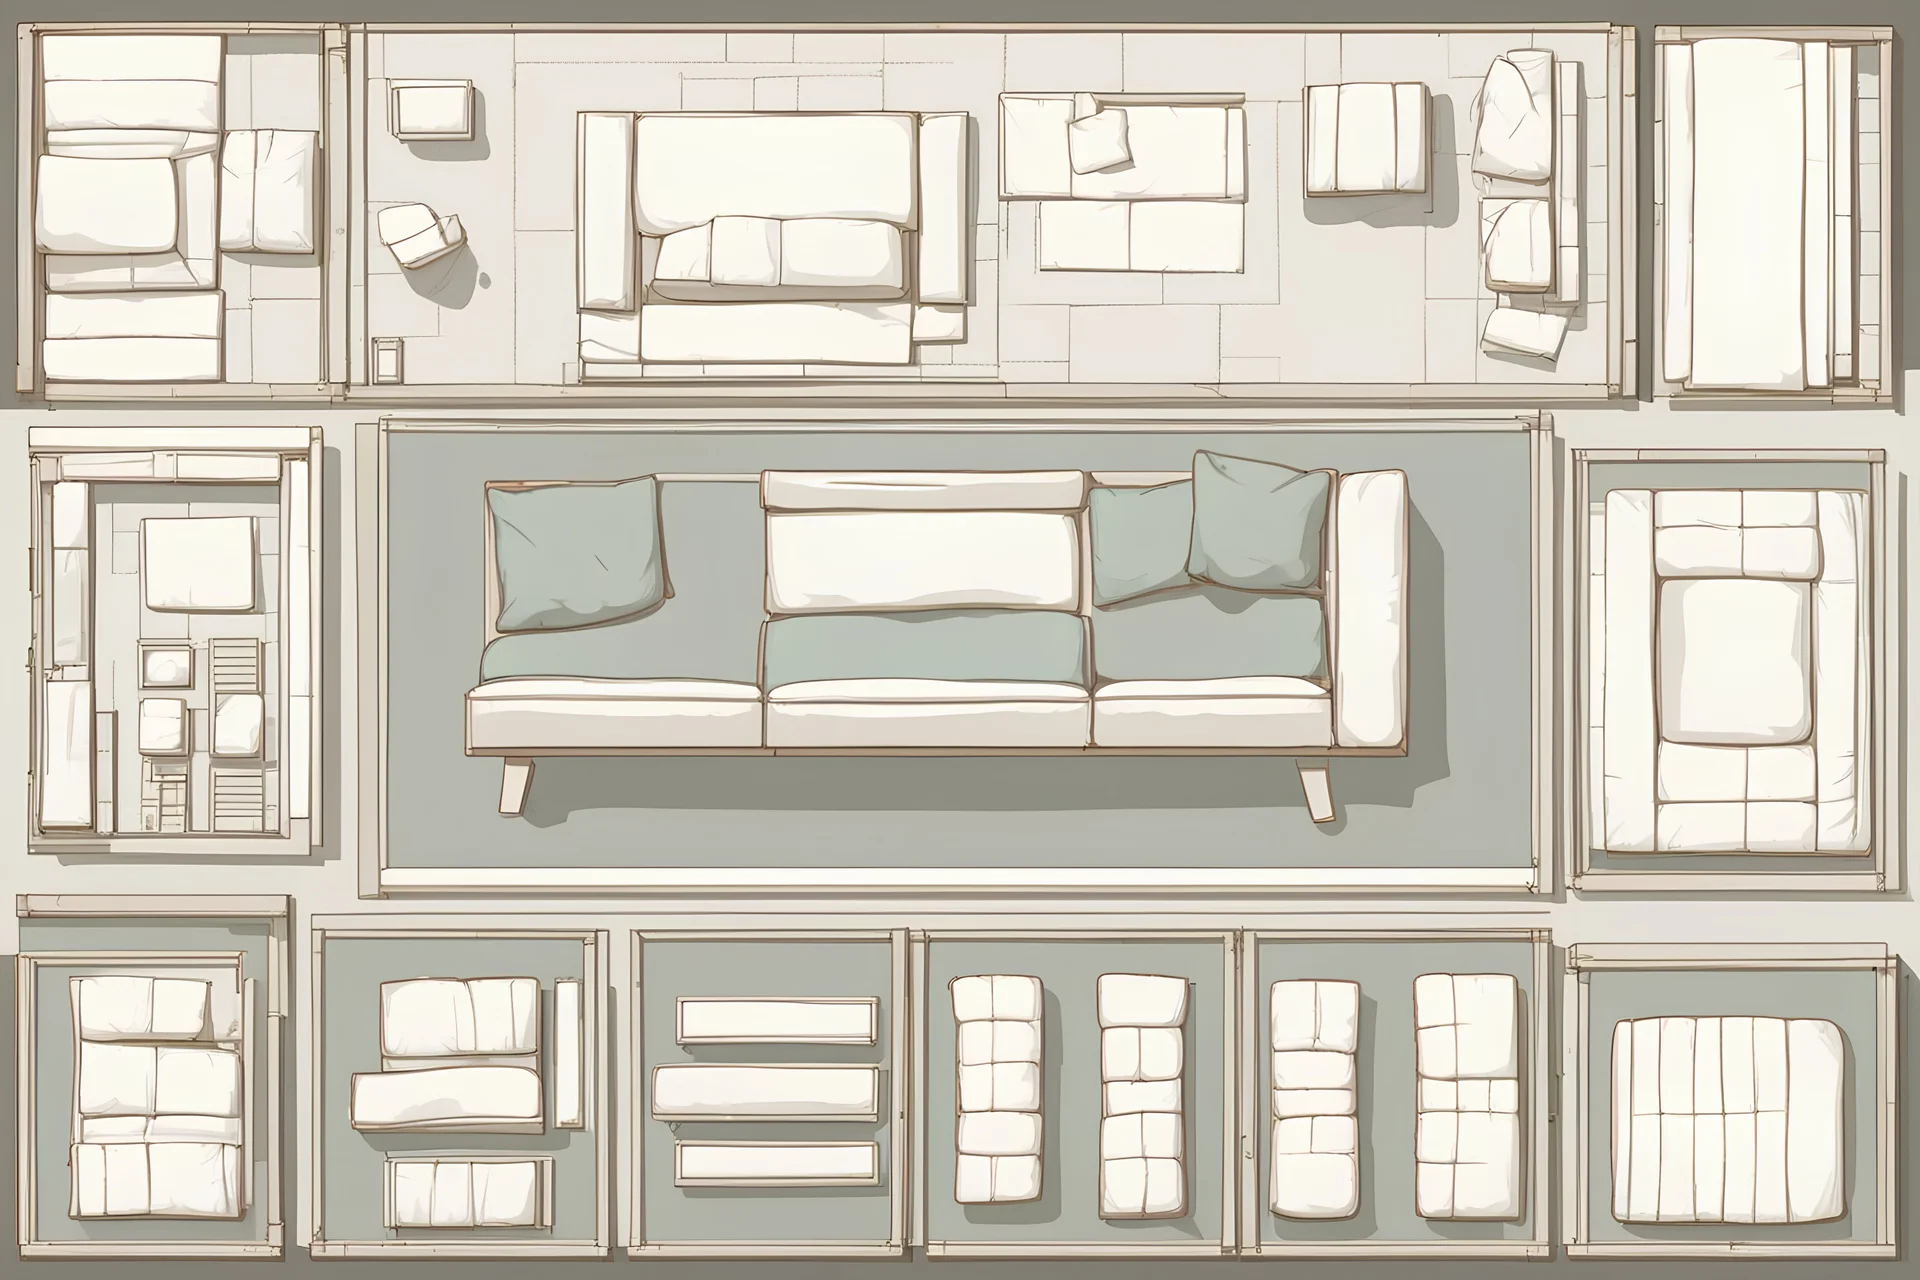 Sprite sheet, furniture, architectural plan, couch, table, chair, top view, dilapidated, post apocalypse,